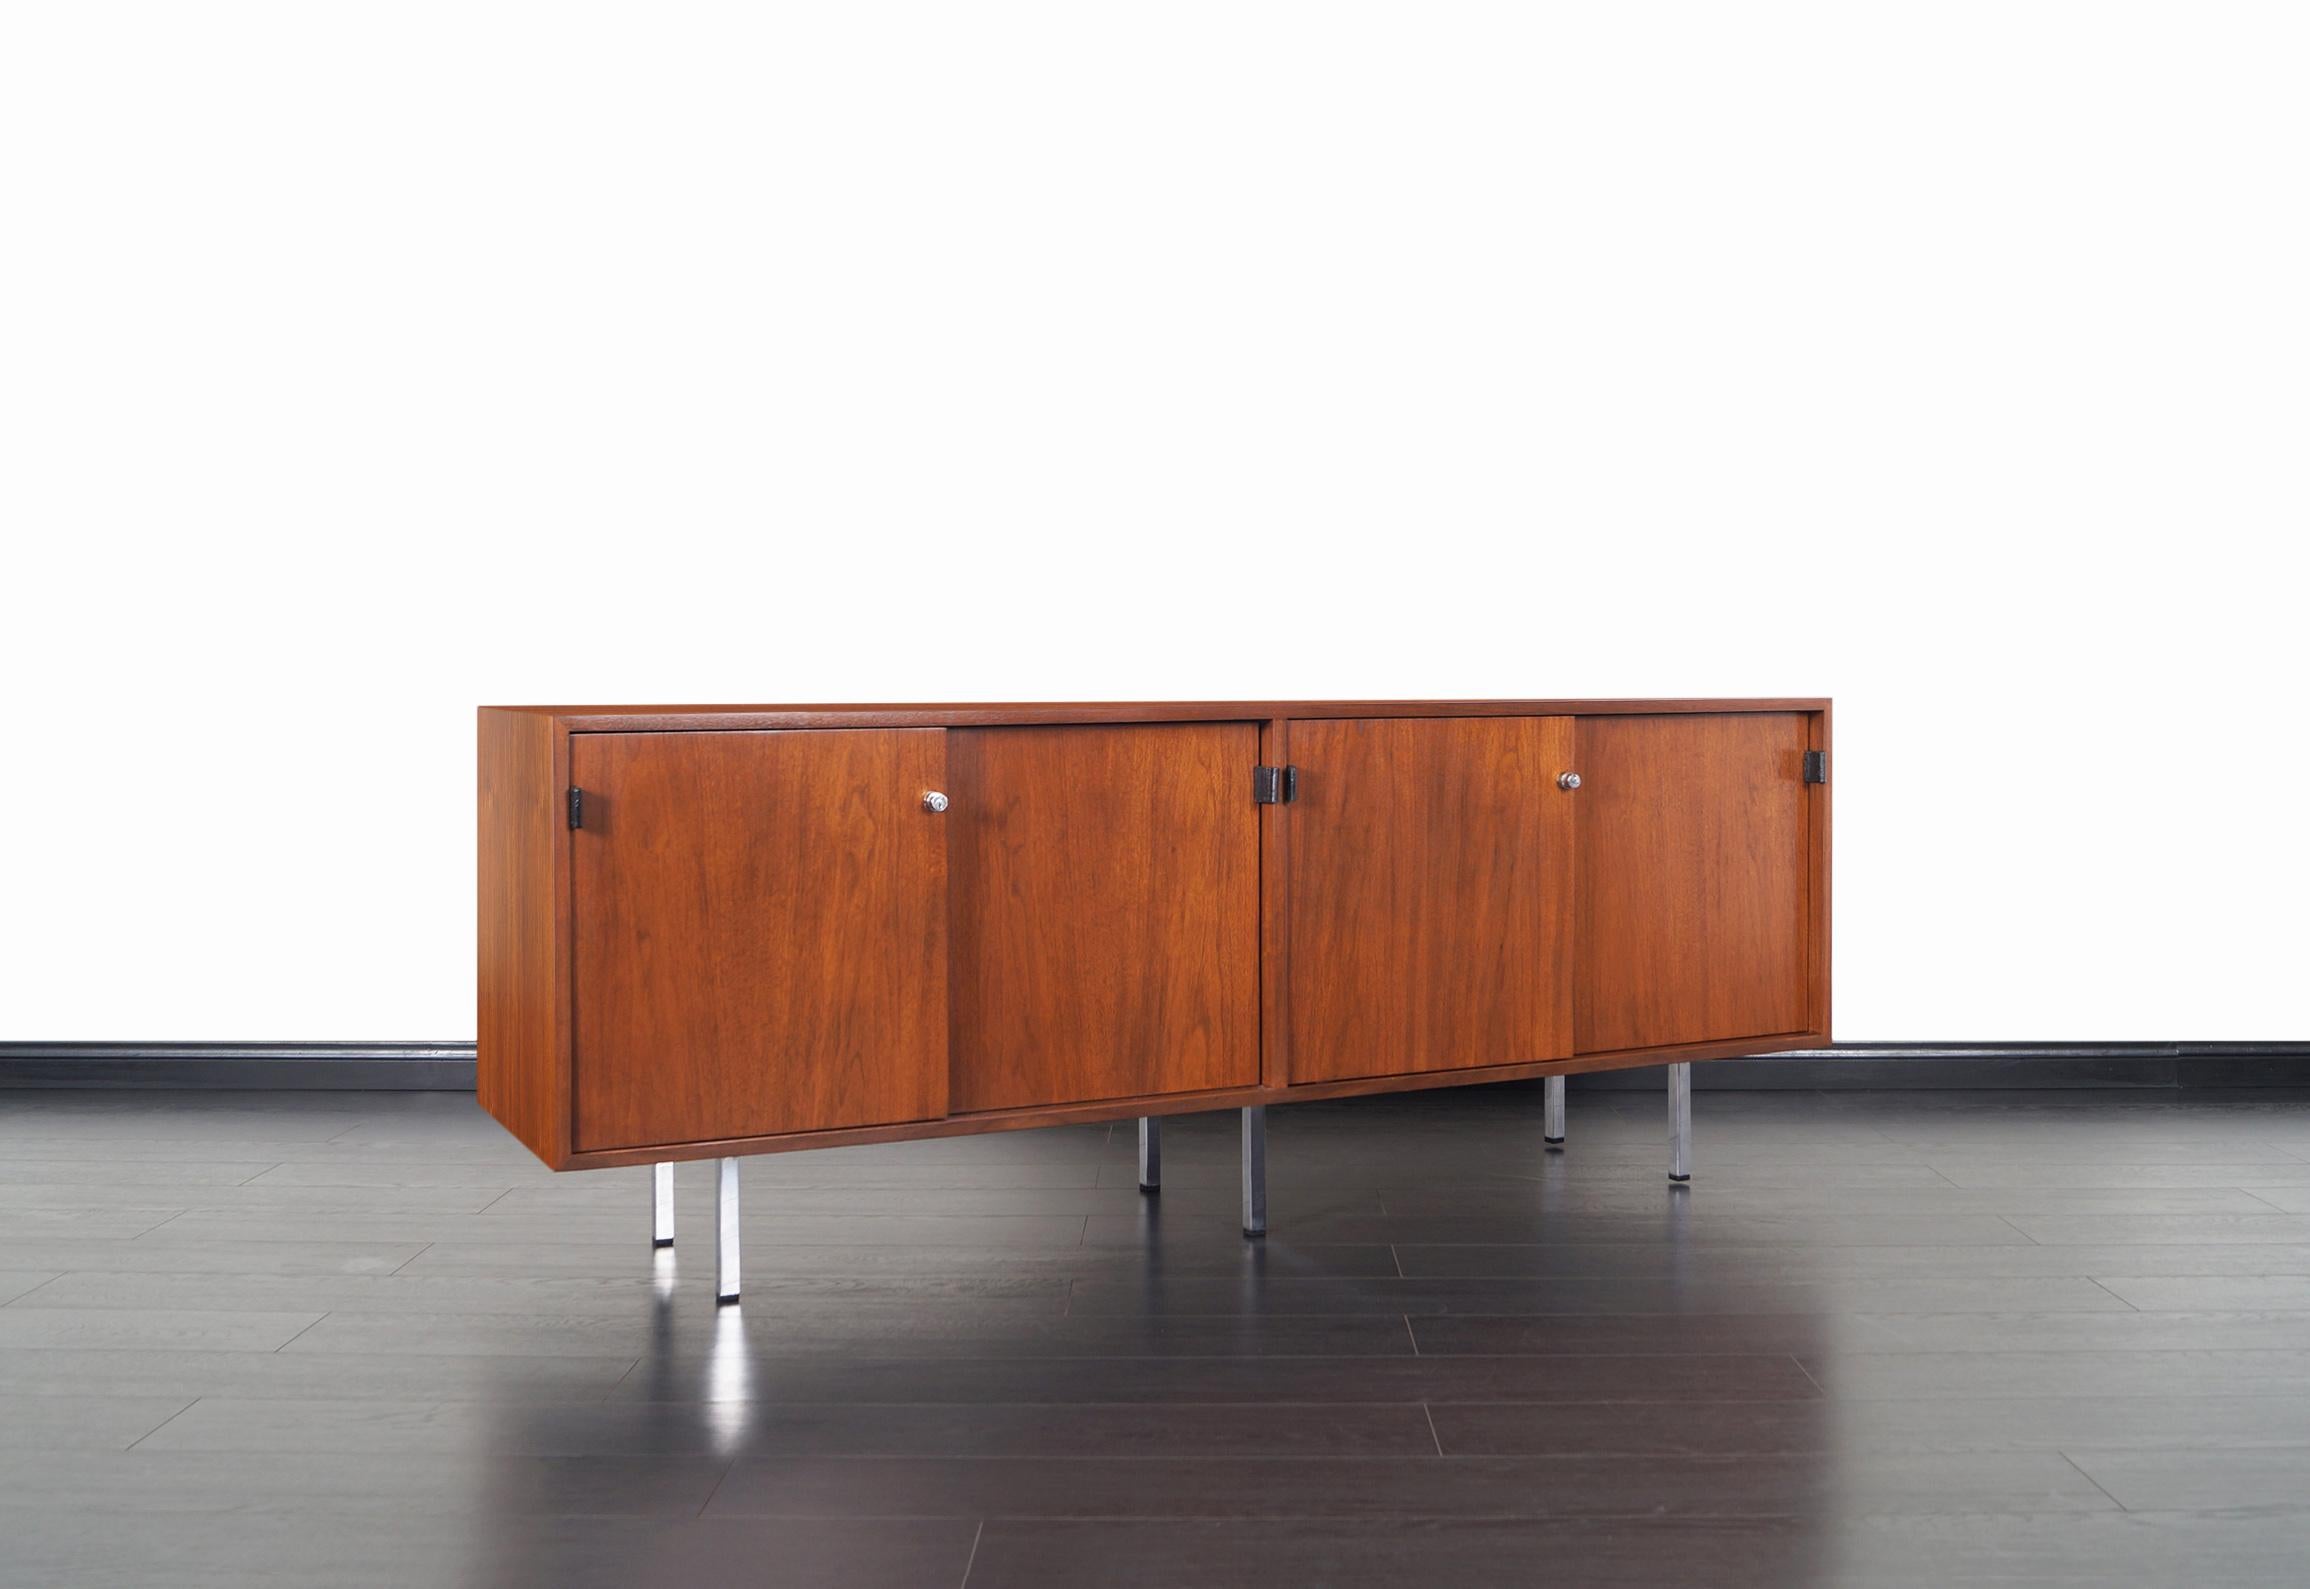 This gorgeous vintage walnut credenza was designed by Florence Knoll for Knoll International. The interior consists of four dovetail drawers, file drawer, pull-out shelf, and two adjustable shelves. Original leather pulls and key included.